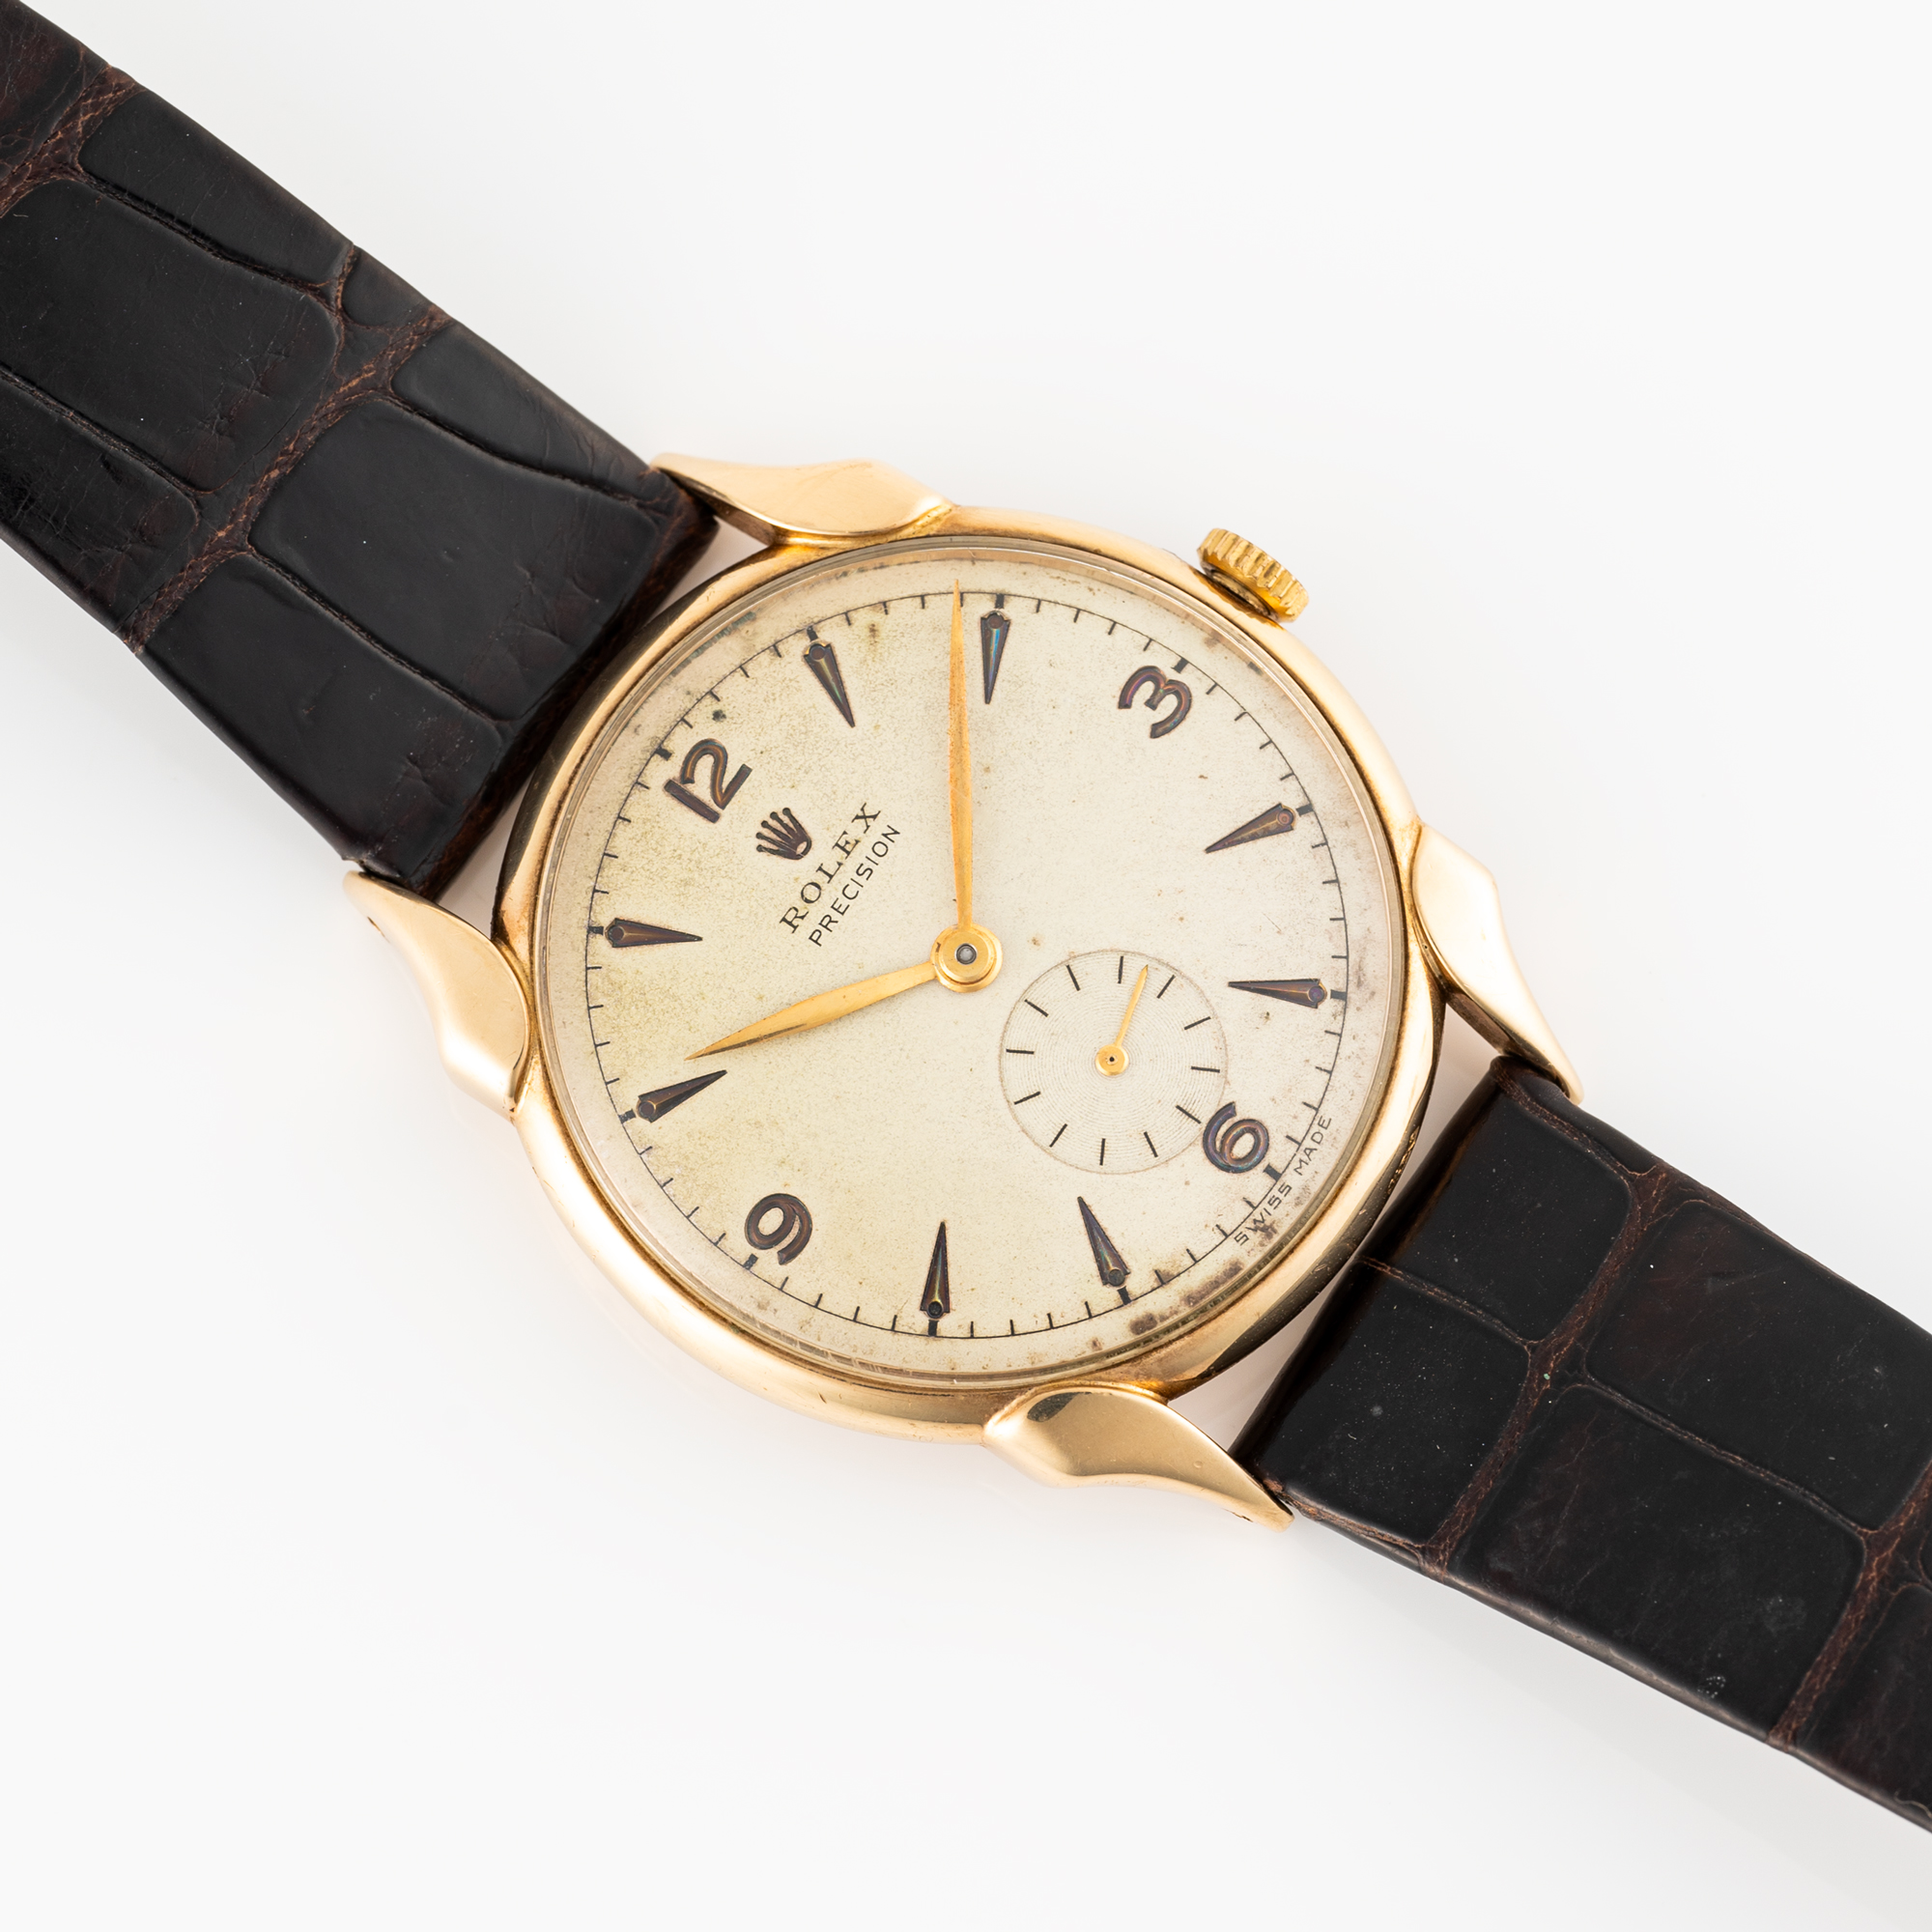 A RARE GENTLEMAN'S SIZE 9CT SOLID GOLD ROLEX PRECISION WRIST WATCH CIRCA 1950s, WITH SCALLOPED - Image 3 of 9